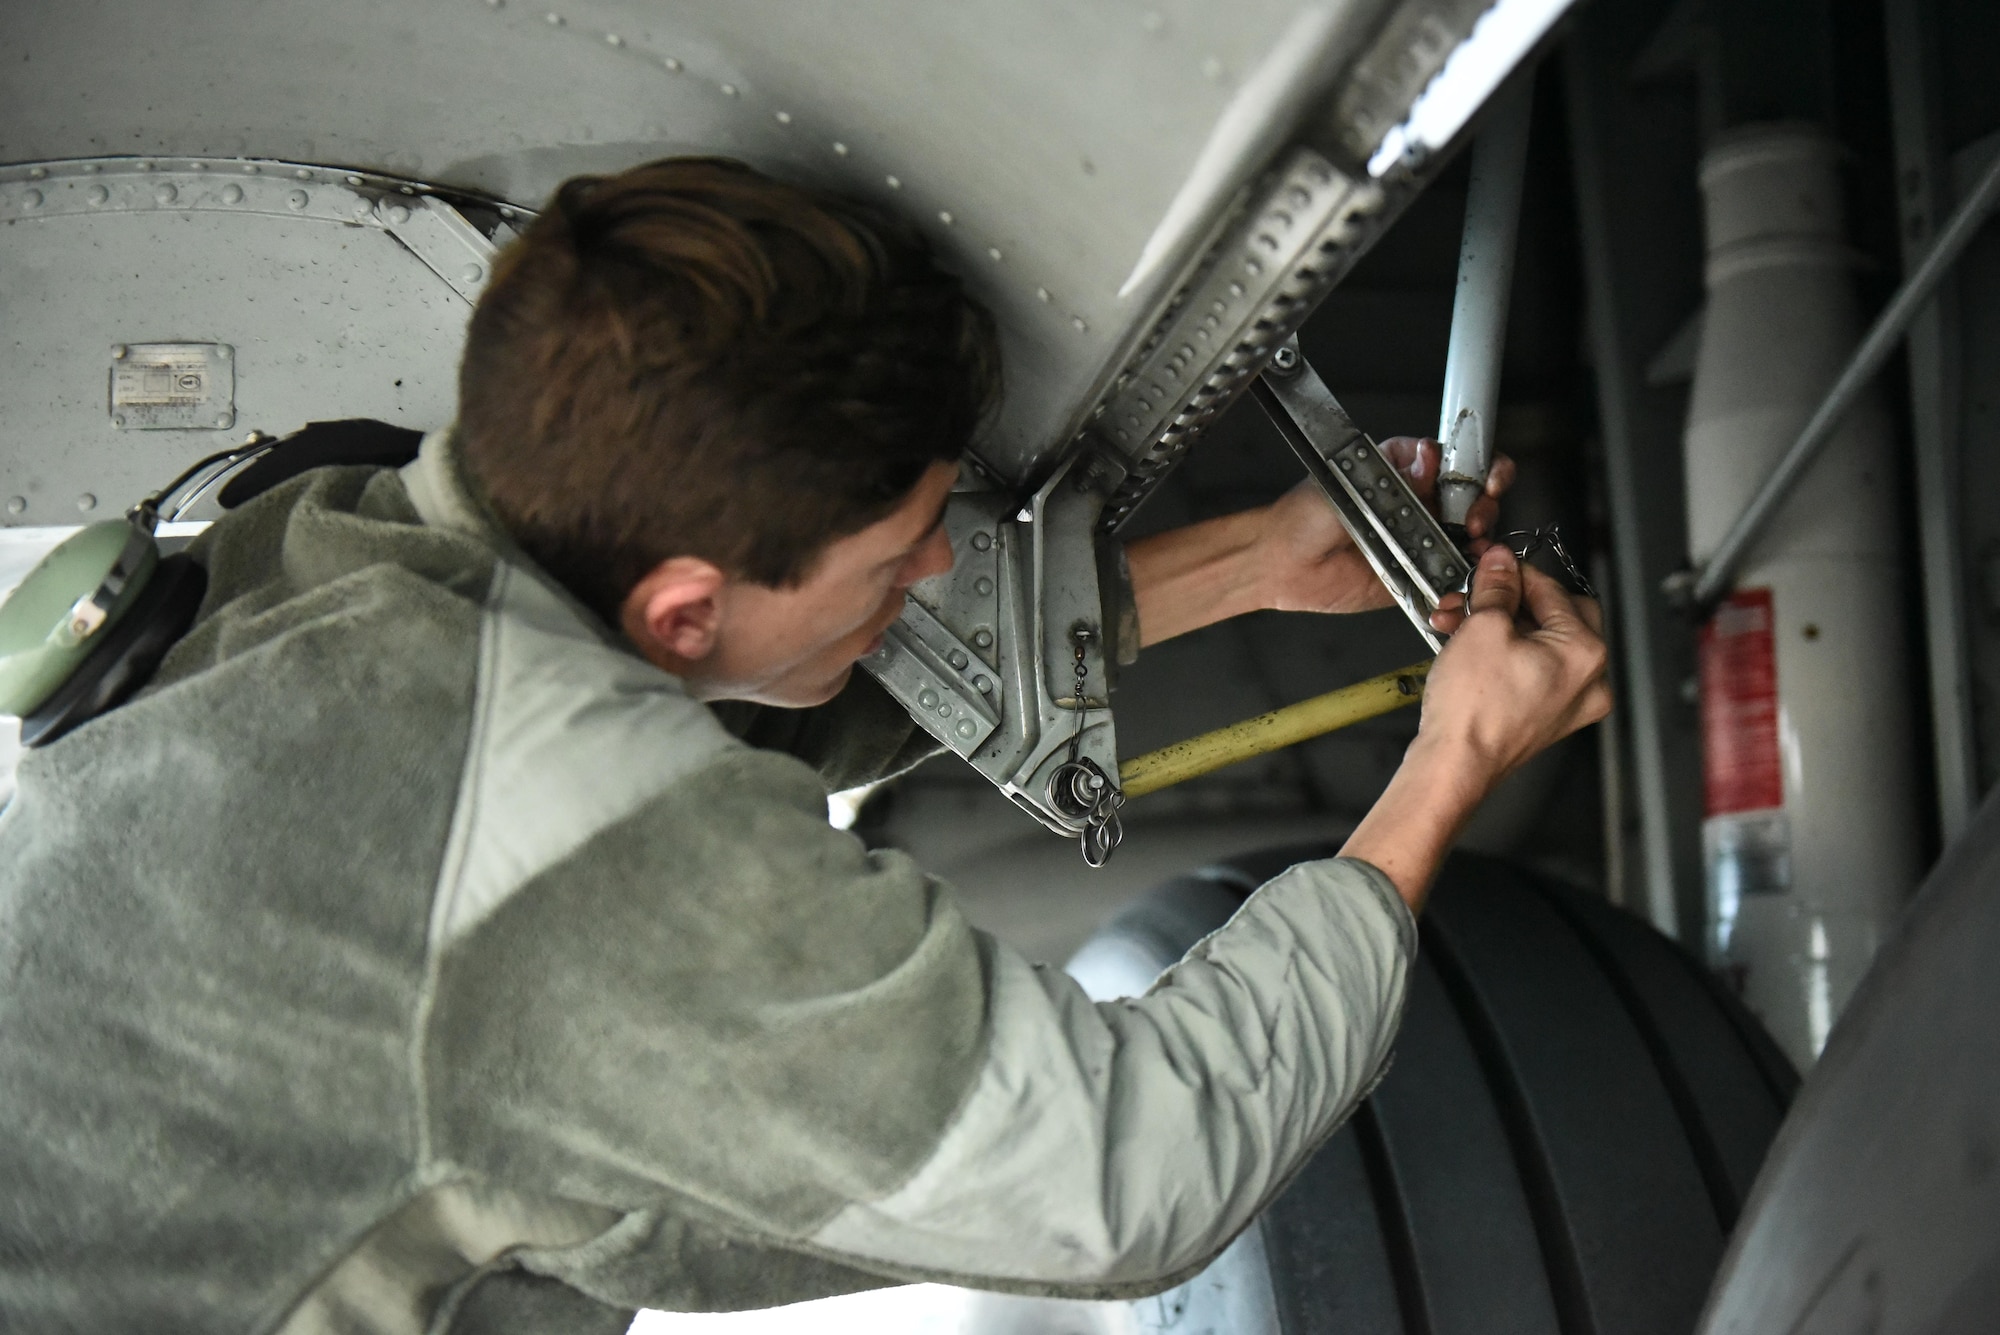 Senior Airman Drew Roberts works on landing gear of a 165th Airlift Wing C-130H3 Hercules during Operation Mangusta in Pisa, Italy. (U.S. Air National Guard photo by Senior Airman Brandon Patterson)
